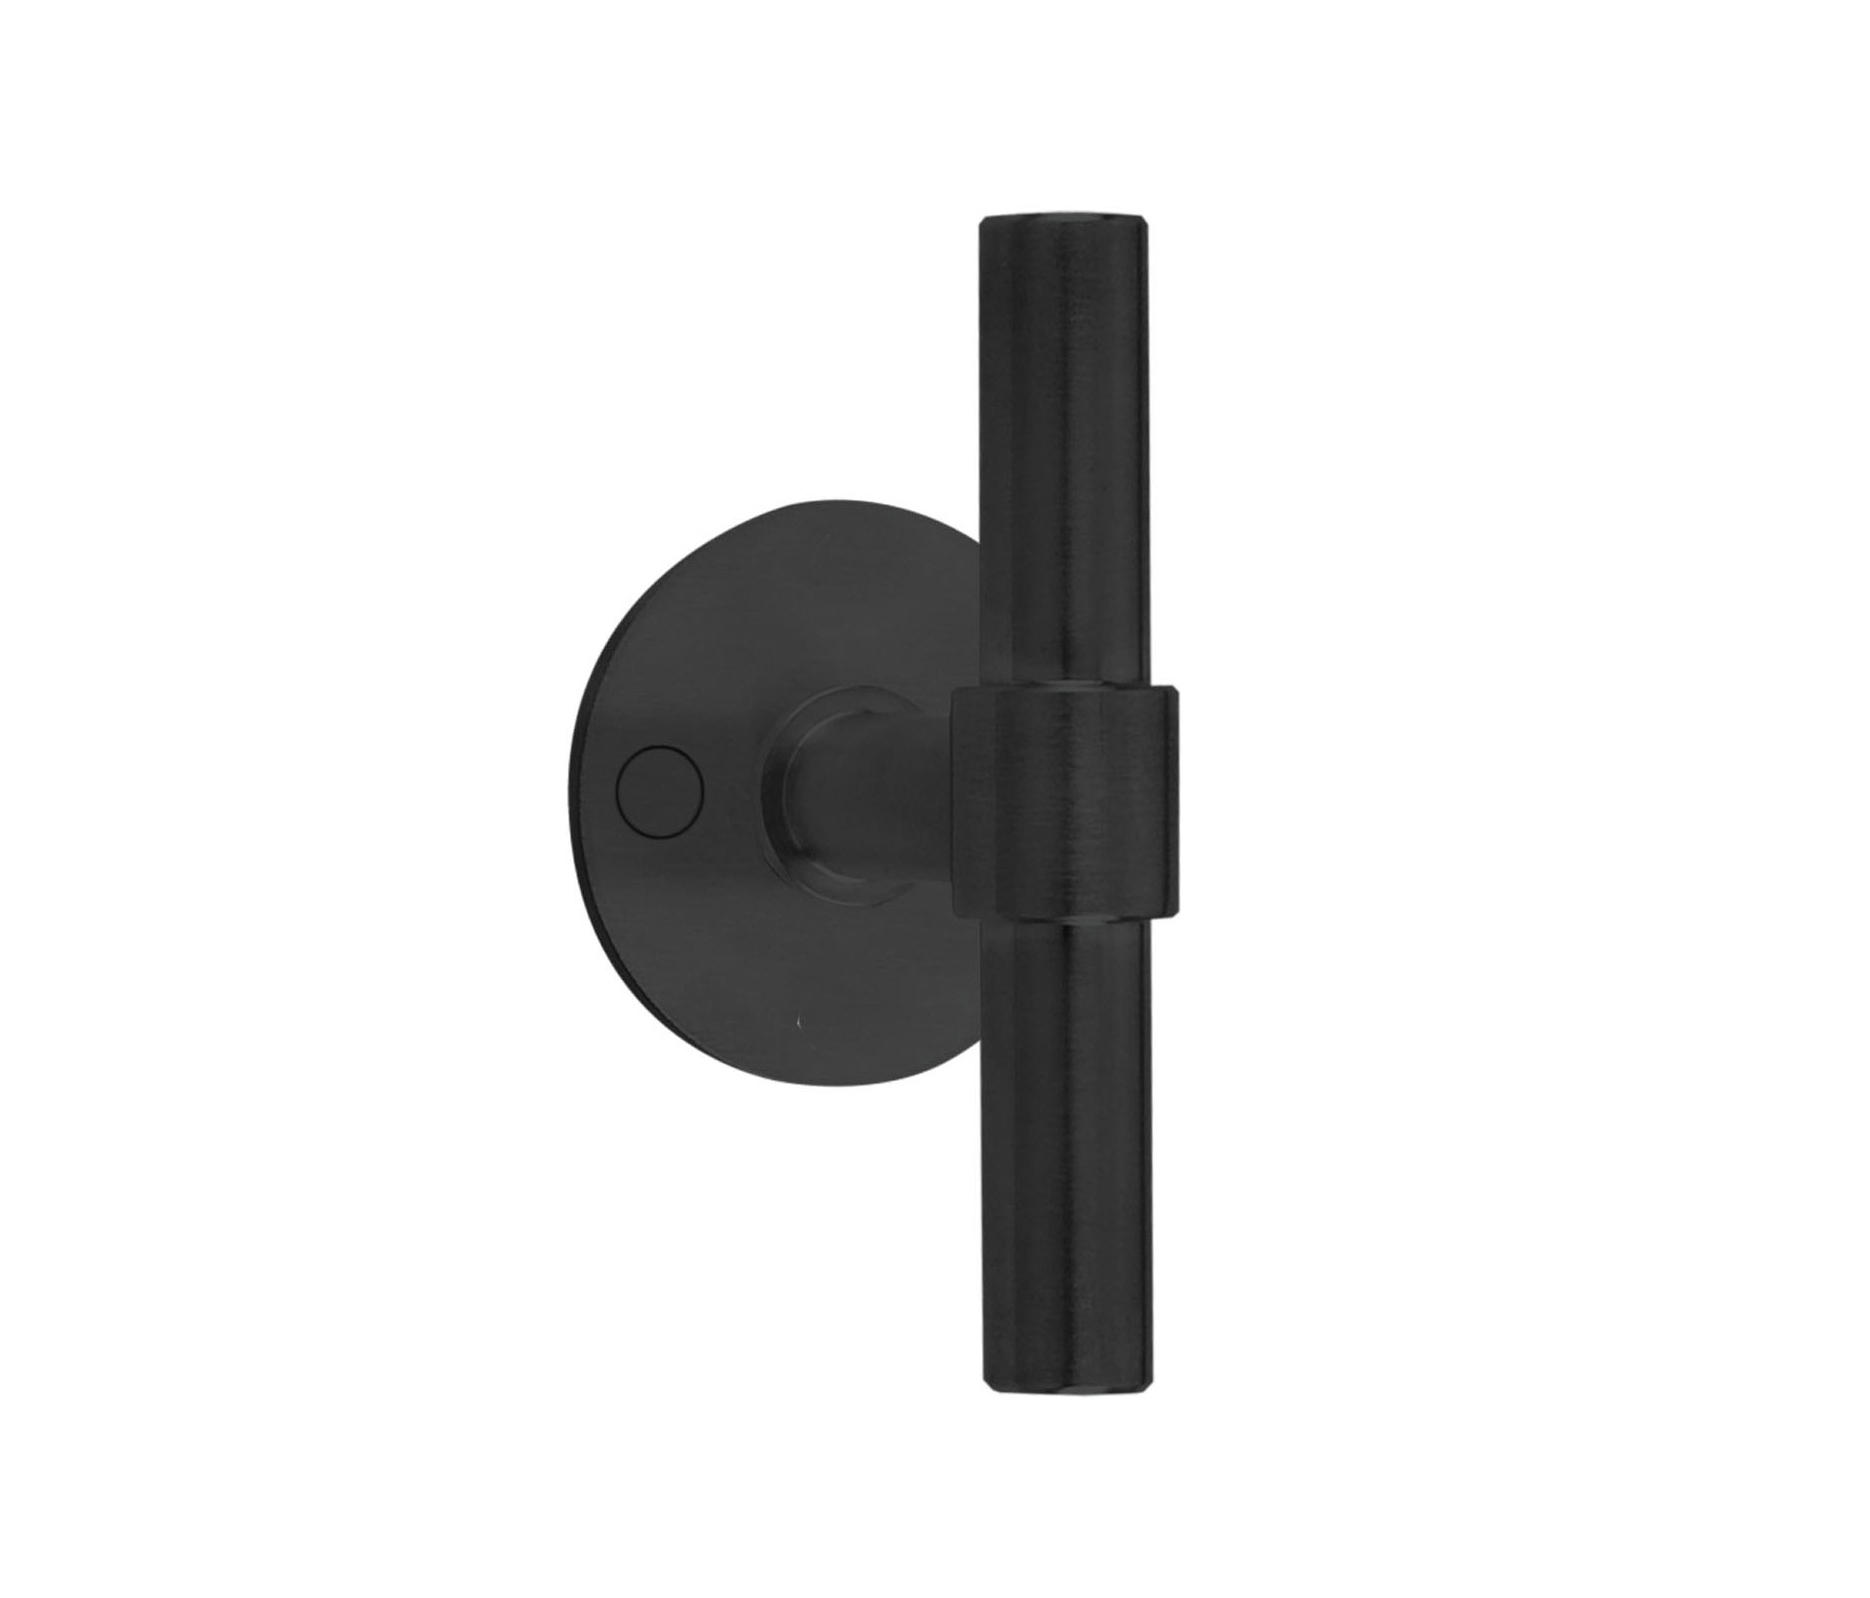 ONE PBT15/50 - Lever handles from Formani | Architonic